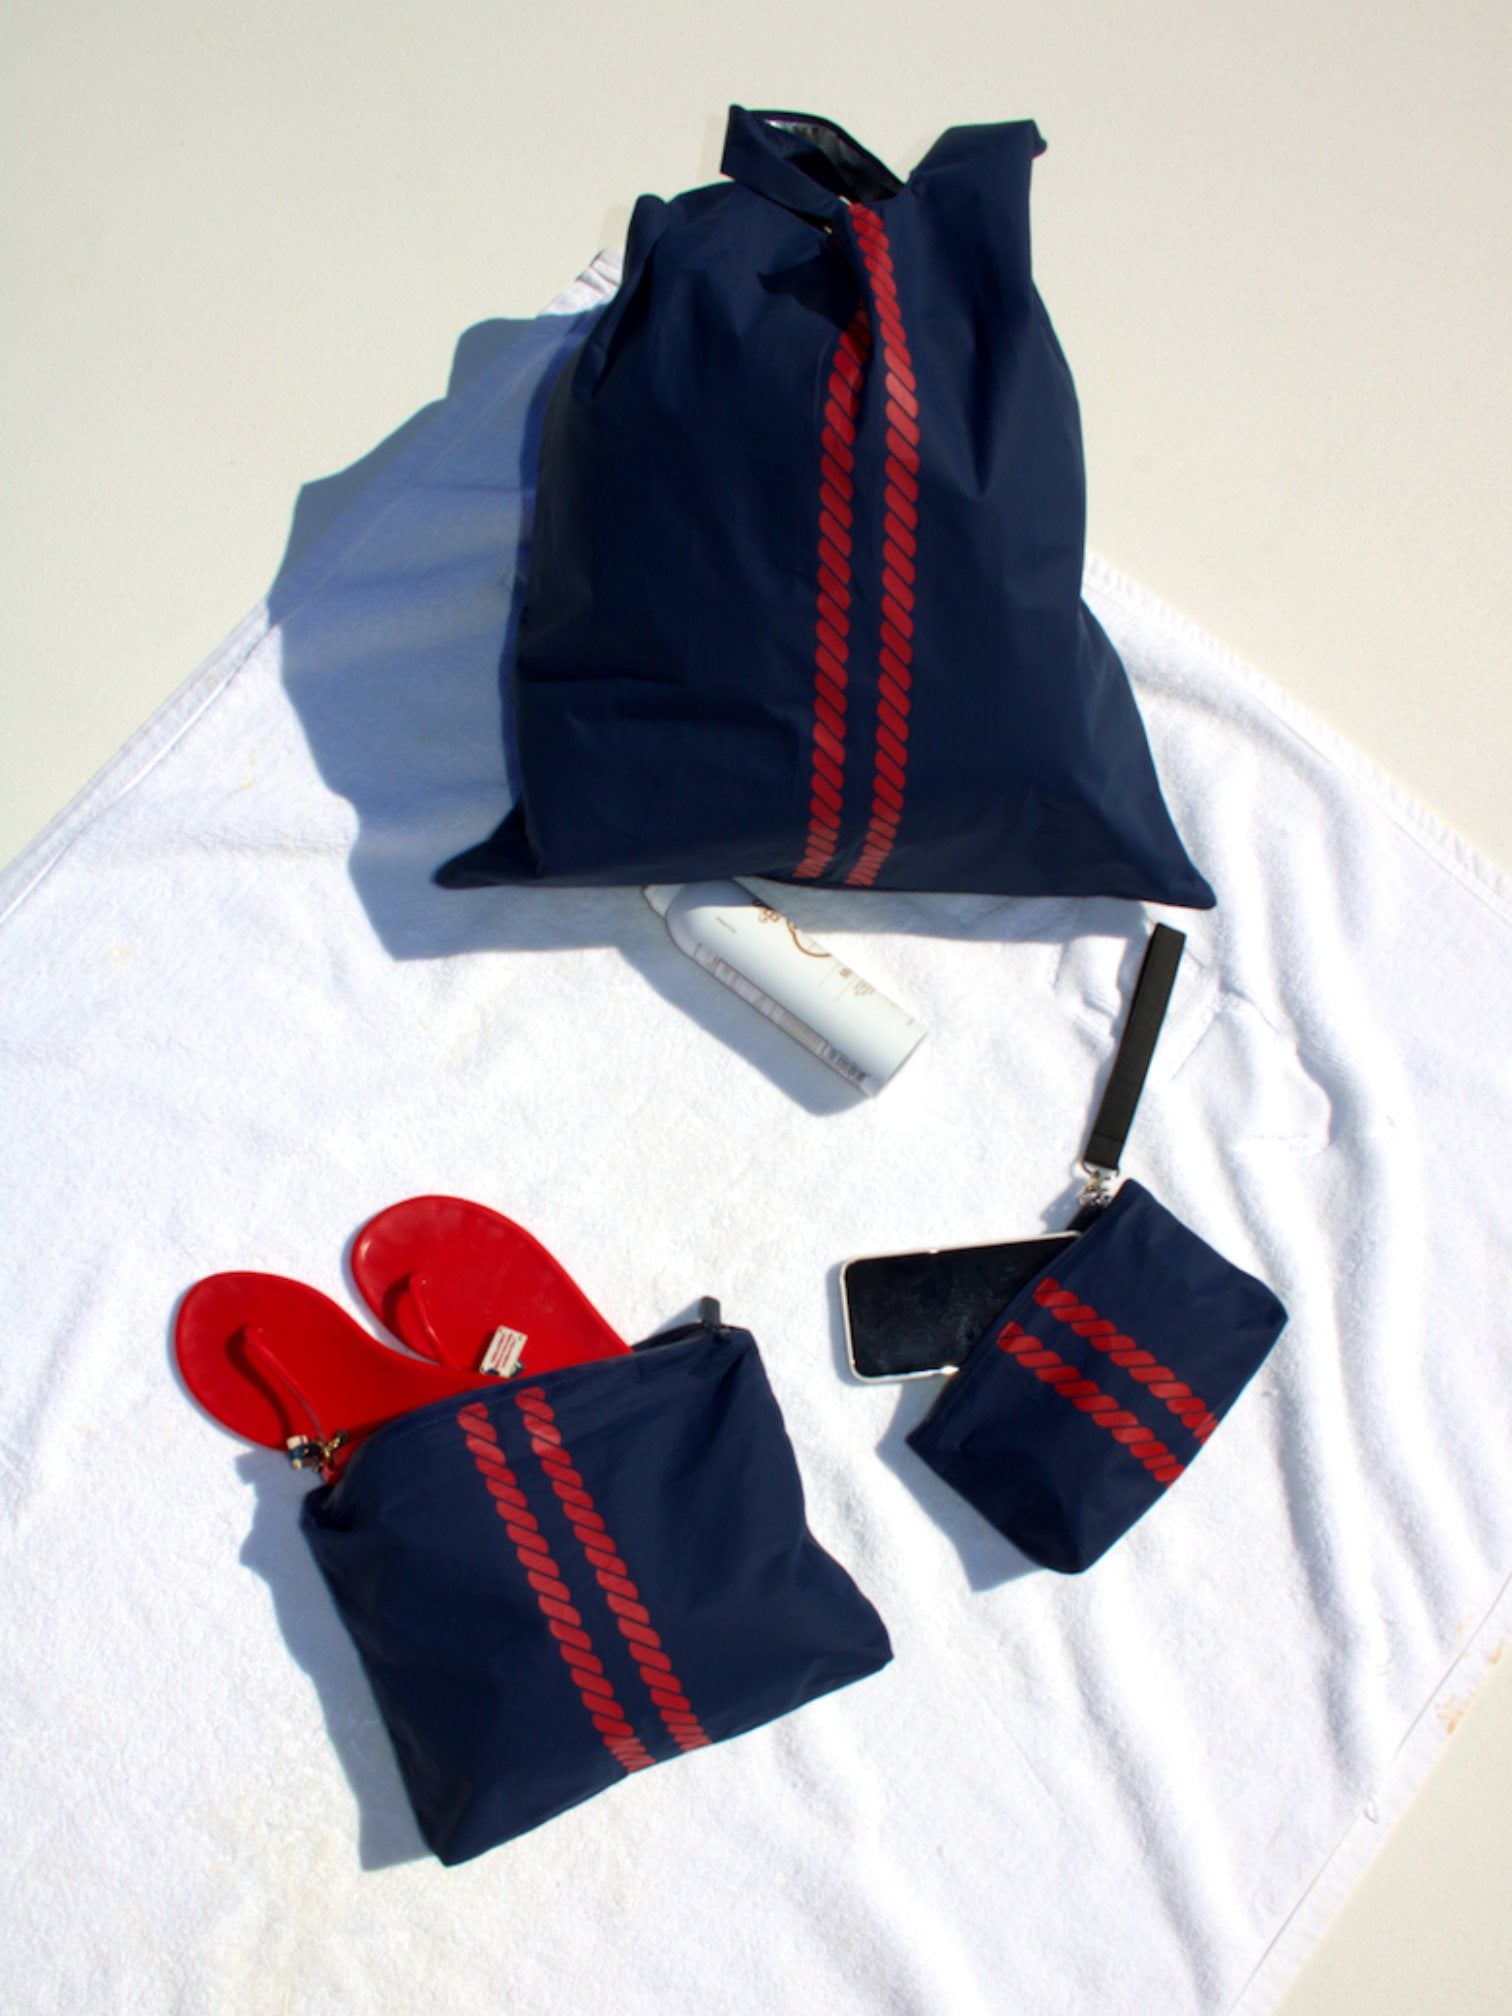 navy blue organizational zipper packs with red stripes